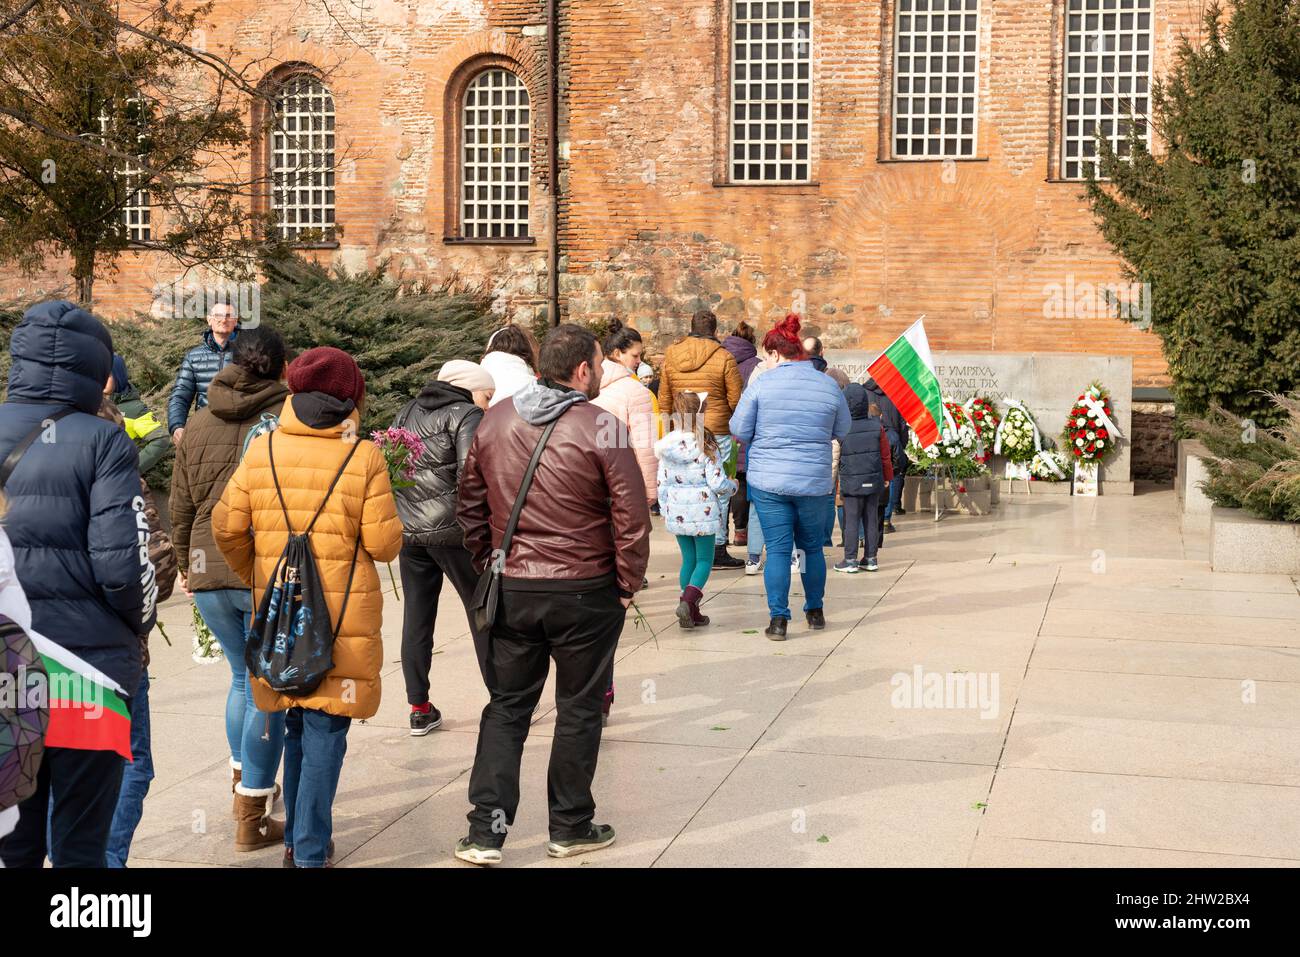 Sofia, Bulgaria. 03 March 2022. People waiting in line outside St. Sophia Church to put flowers at the Monument to the Unknown Warrior in respect and commemoration to the Bulgarian soldiers lost their lives in wars as Bulgarians celebrate the Bulgaria National Day. Stock Photo